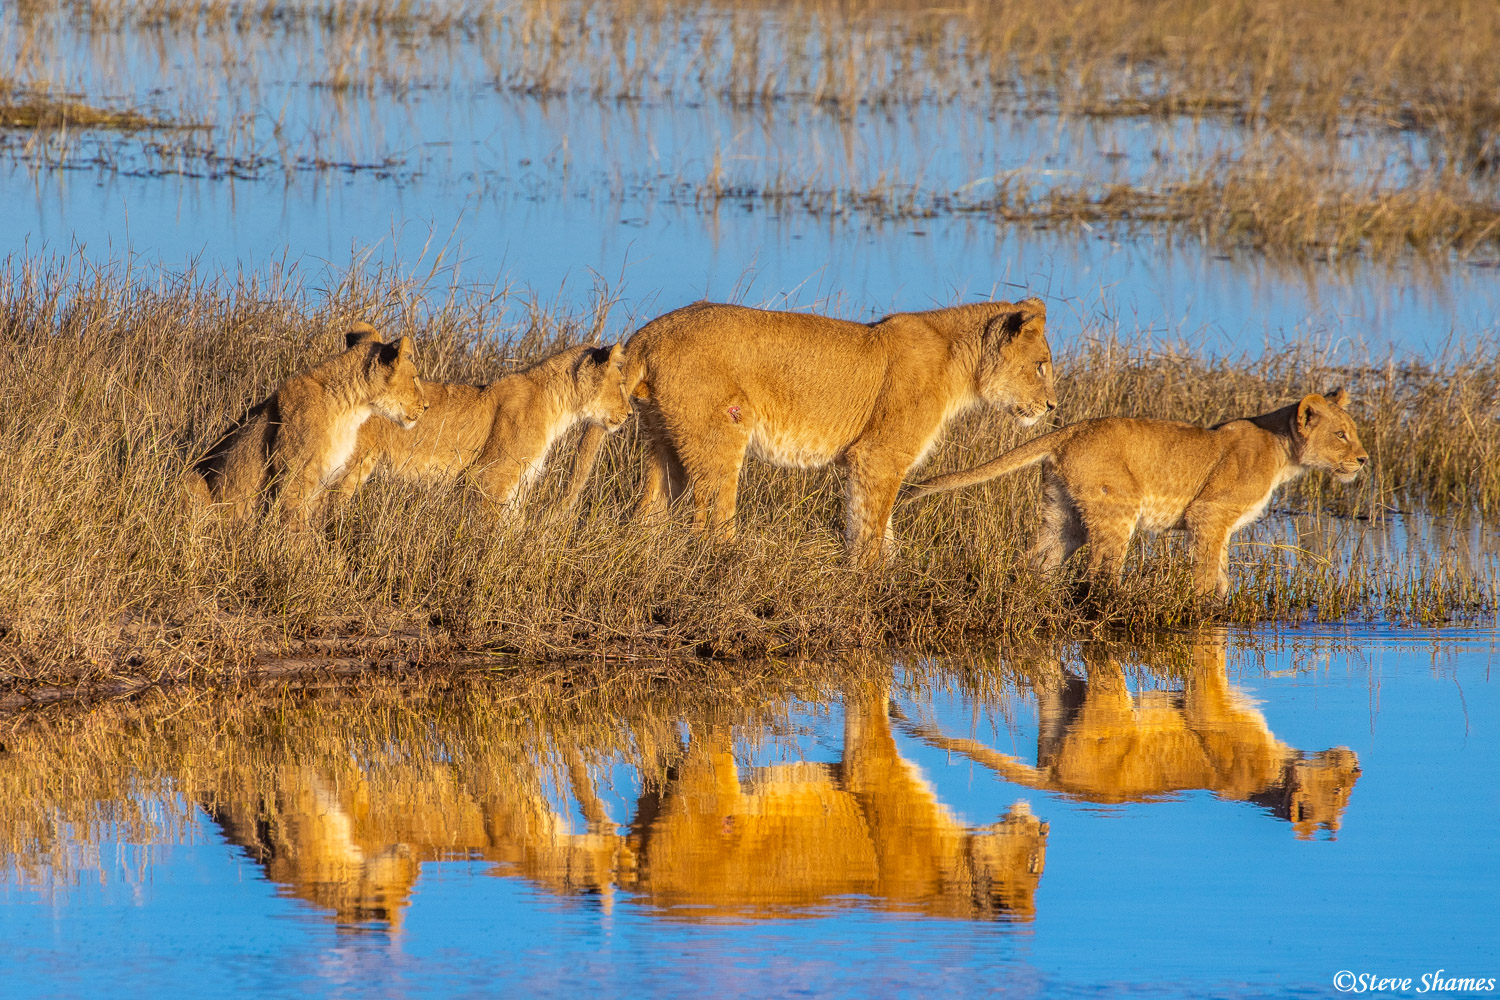 Lioness leading her cubs into the marsh of the Chobe River. They were lined up perfectly for a great reflection!